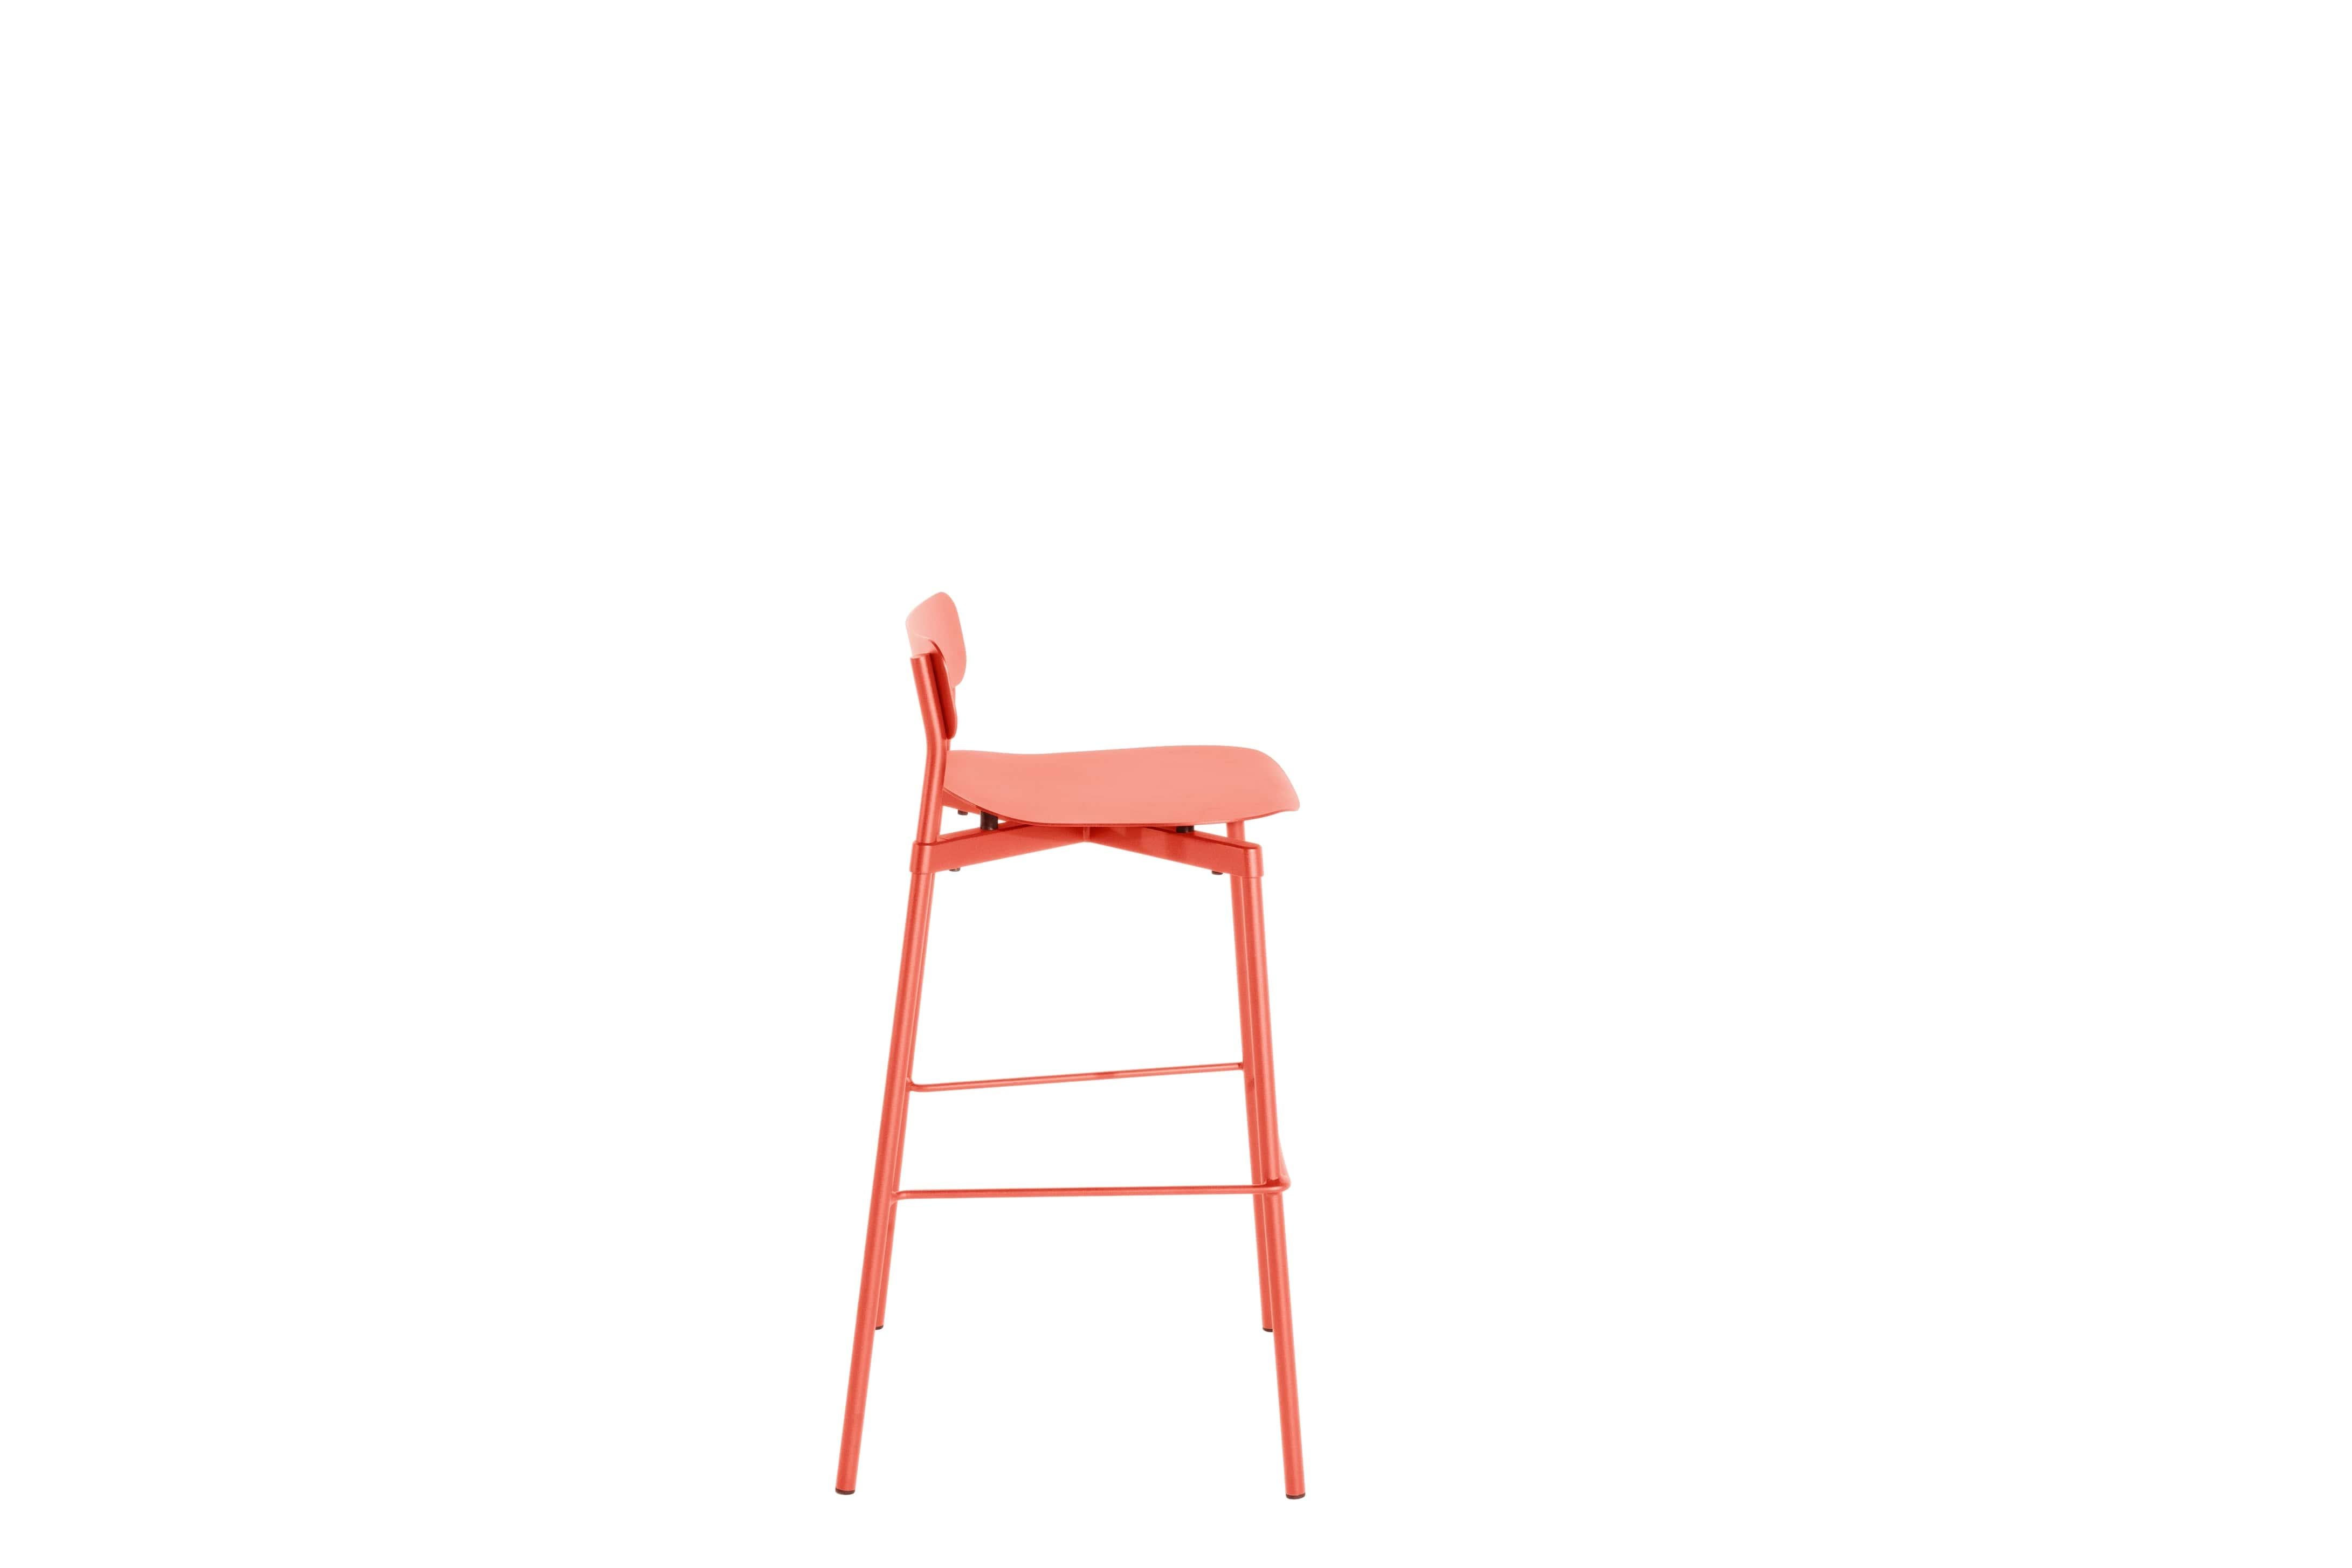 Petite Friture Large Fromme Bar stool in Coral Aluminium by Tom Chung, 2020

The Fromme collection stands out by its pure line and compact design. Absorbers placed under the seating gives a soft and very comfortable flexibility to seats. Made from